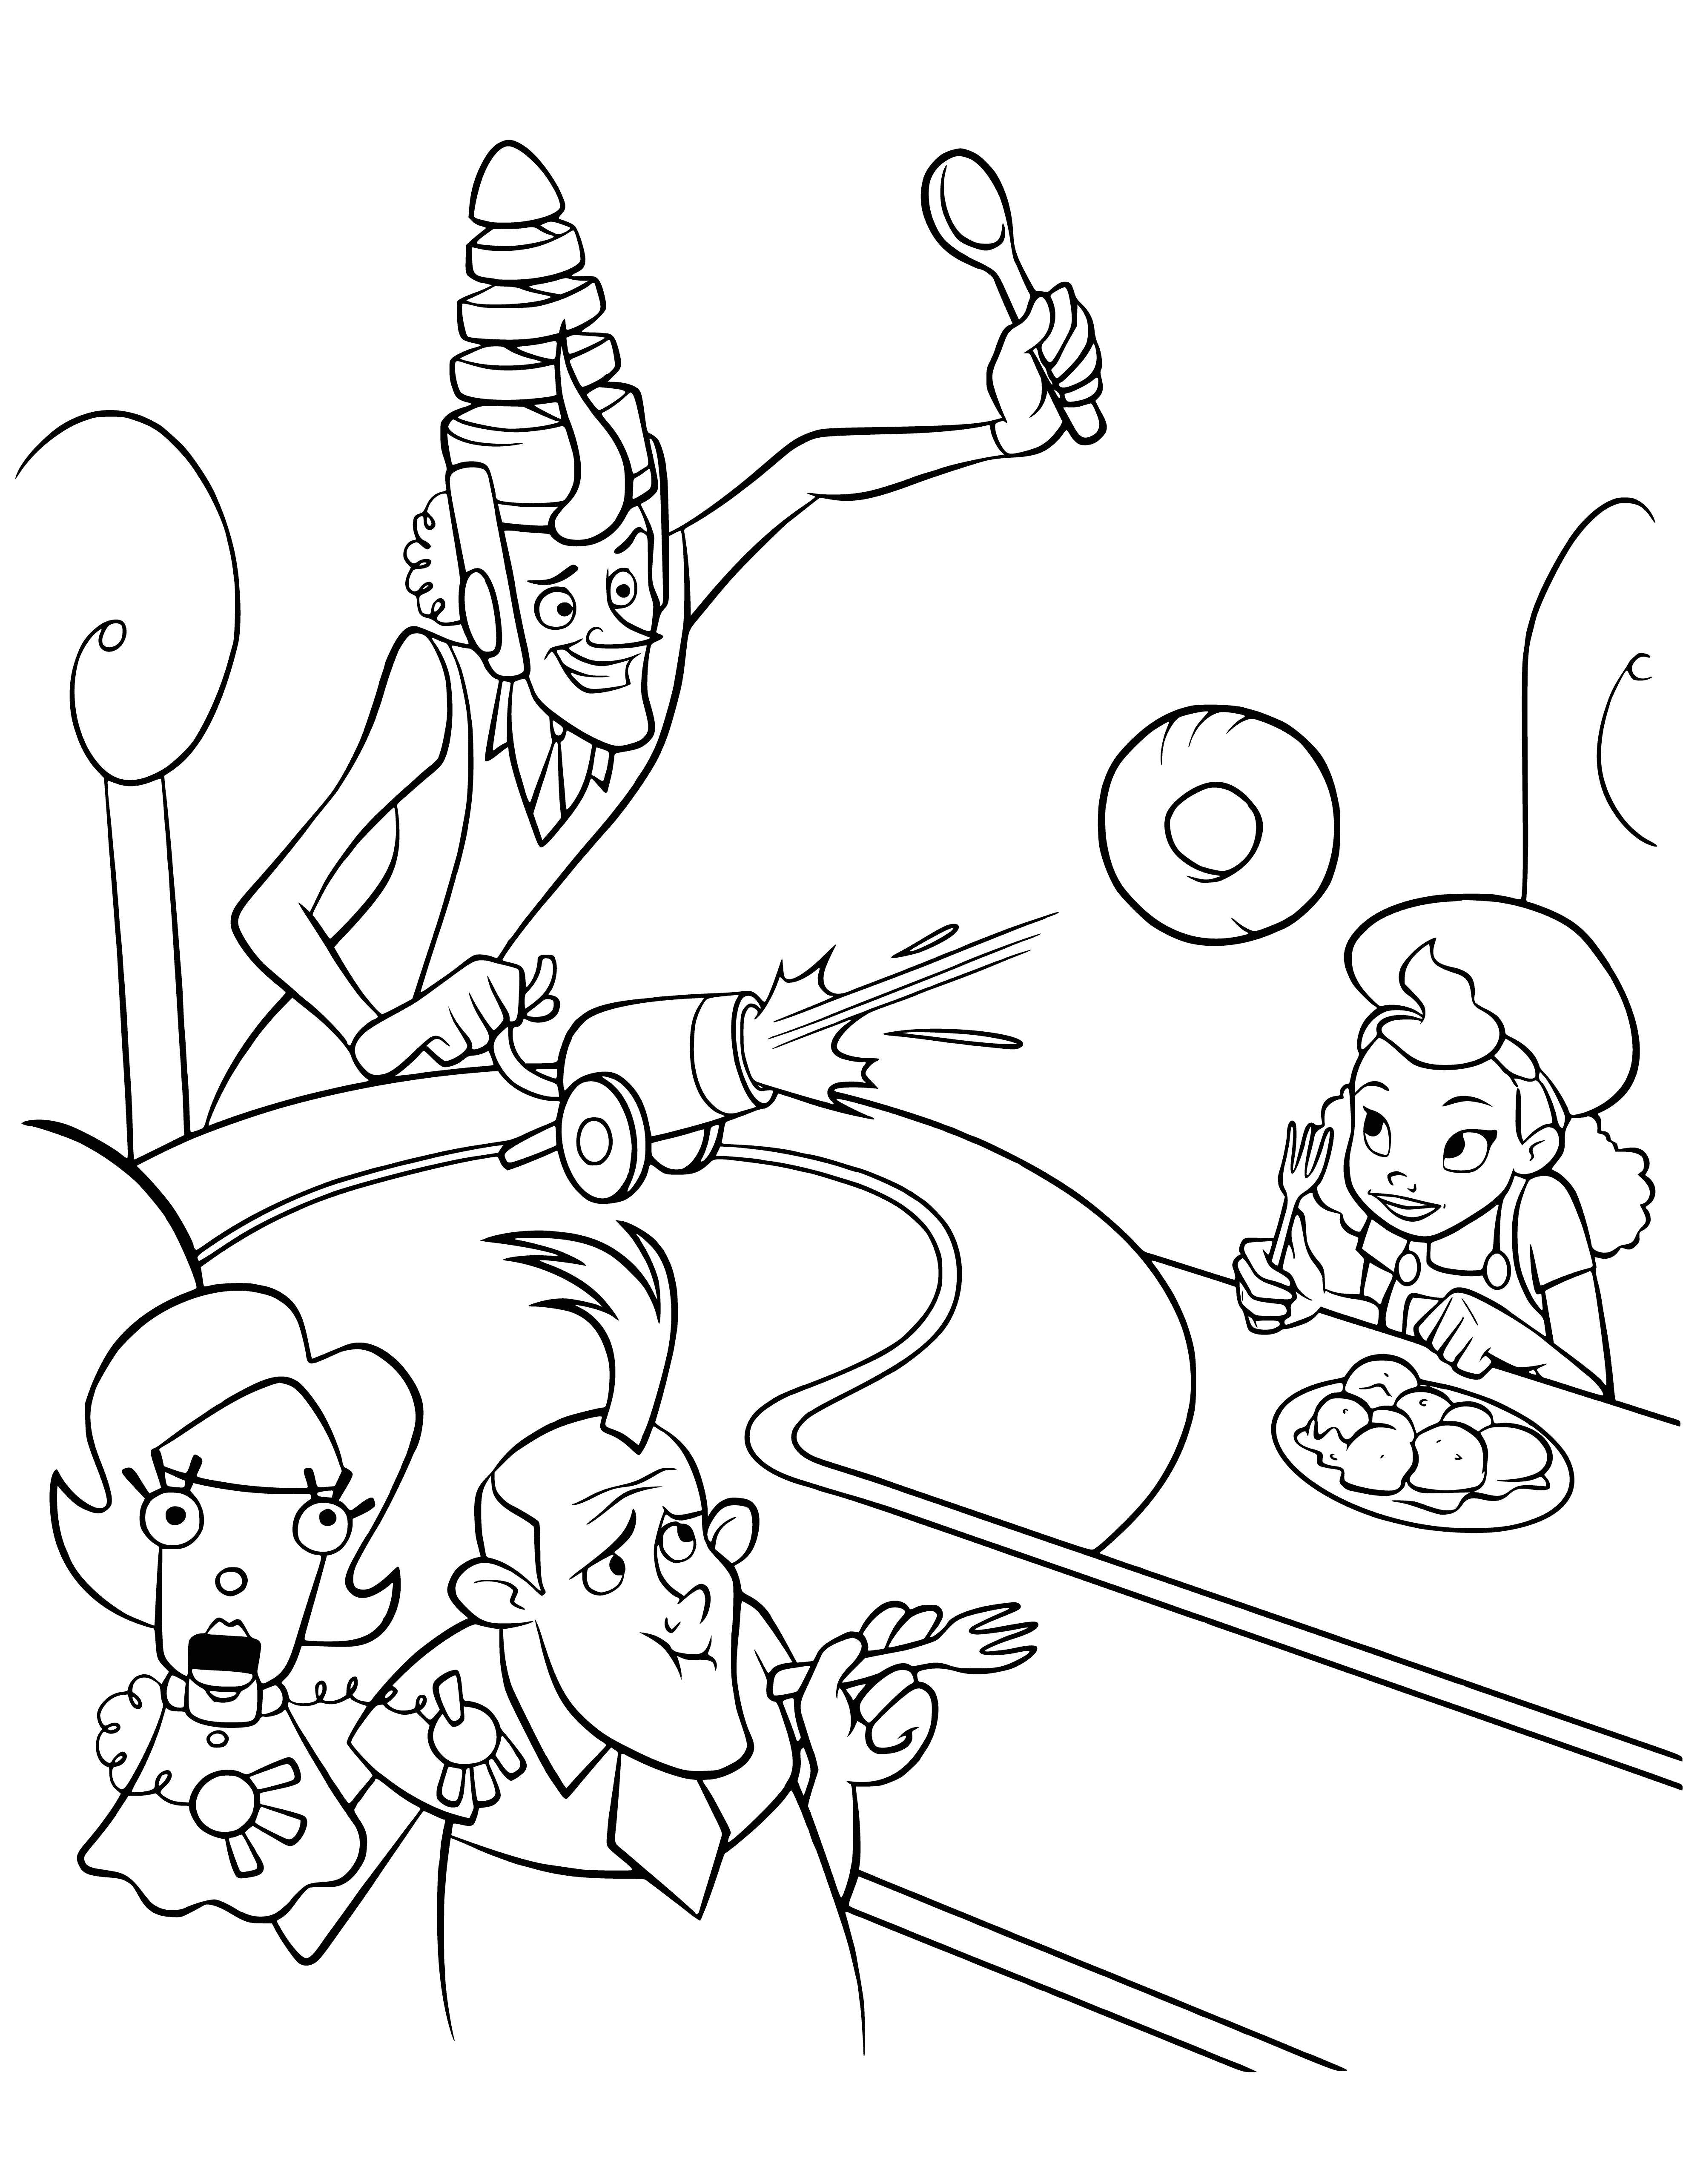 coloring page: Three people eating lunch; man w/ sandwich in middle, women w/ salad & soup on either side.